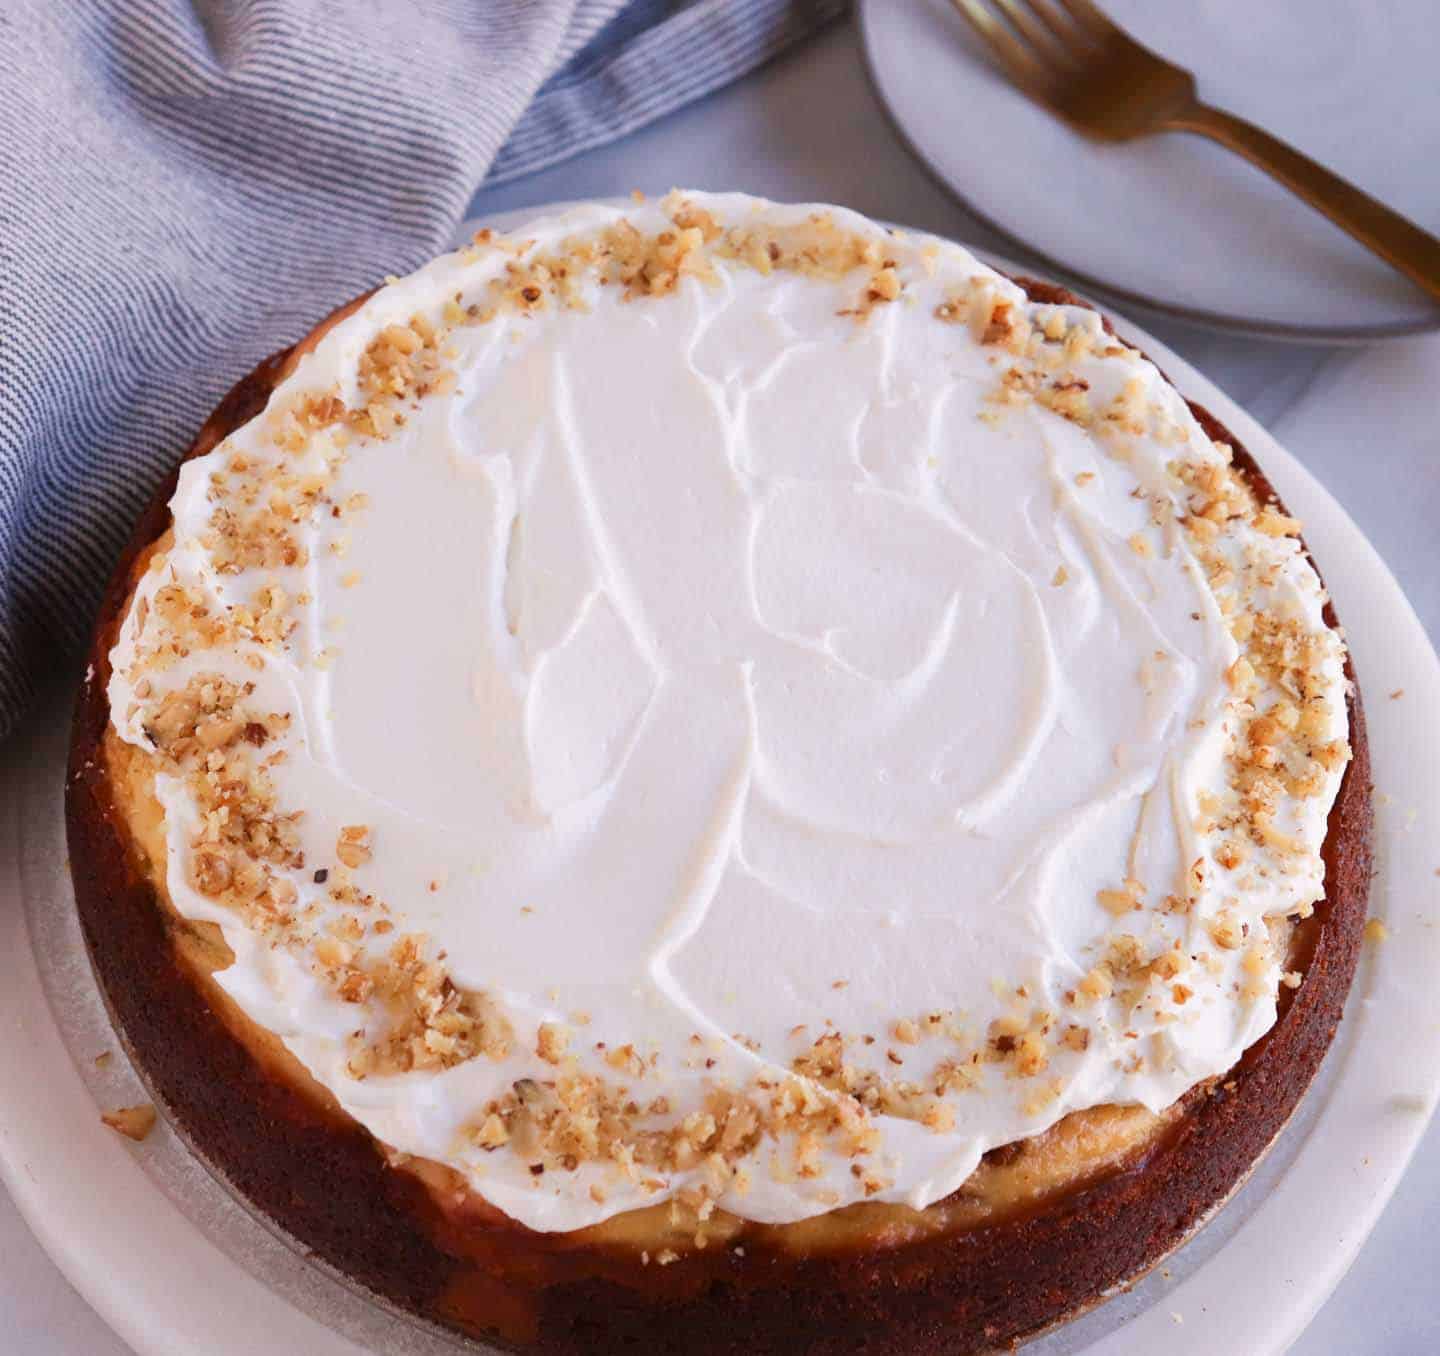 a whole carrot cake cheesecake topped with cheesecake and nuts.